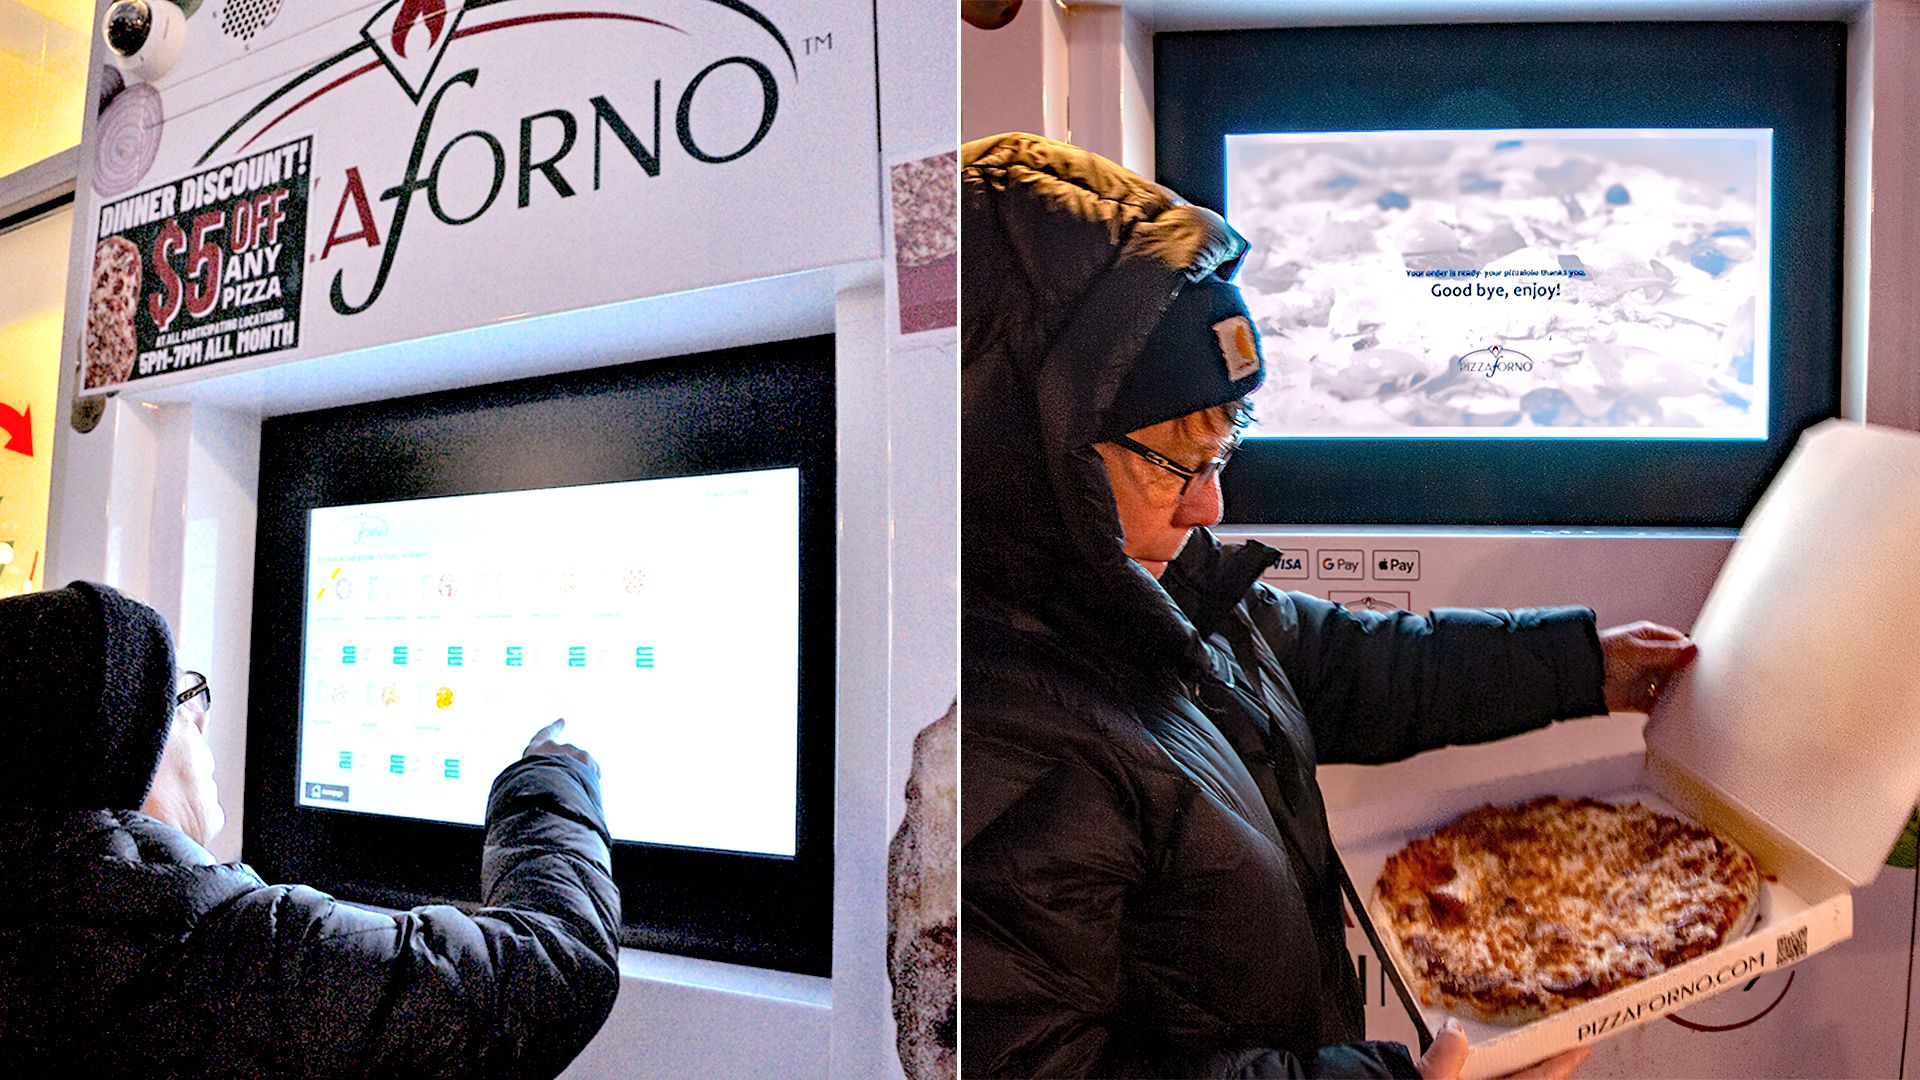 Images of the author ordering and receiving a pizza vending machine